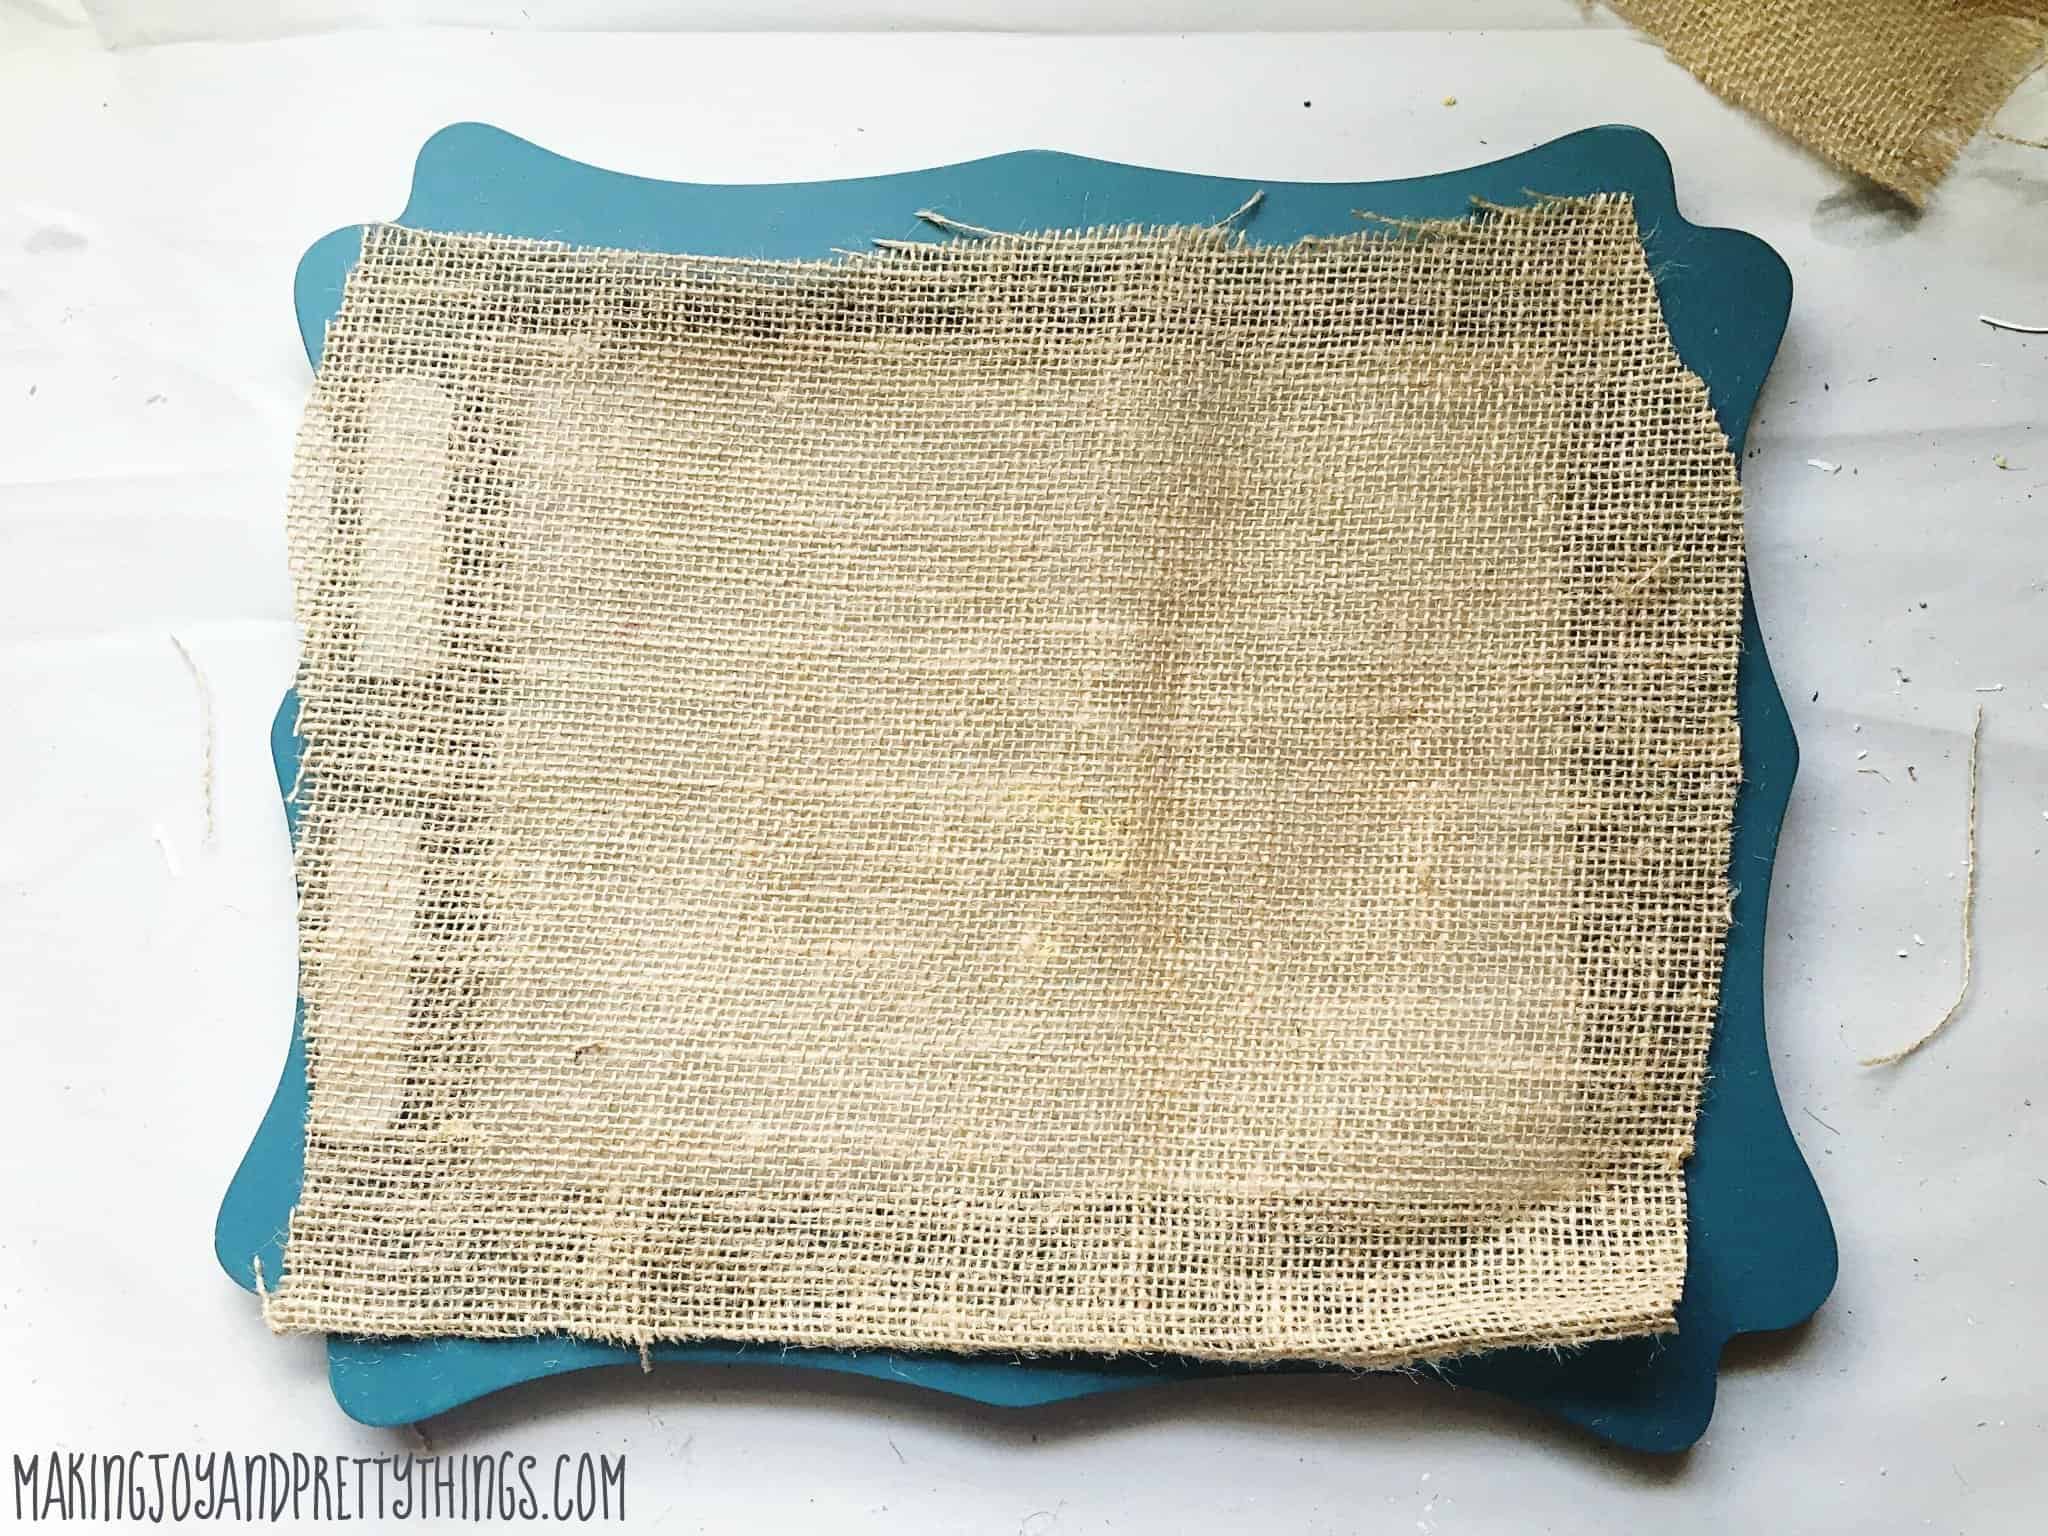 Cutting burlap to use as a backer for a DIY picture frame tray to hold decor items and use in a room as decoration